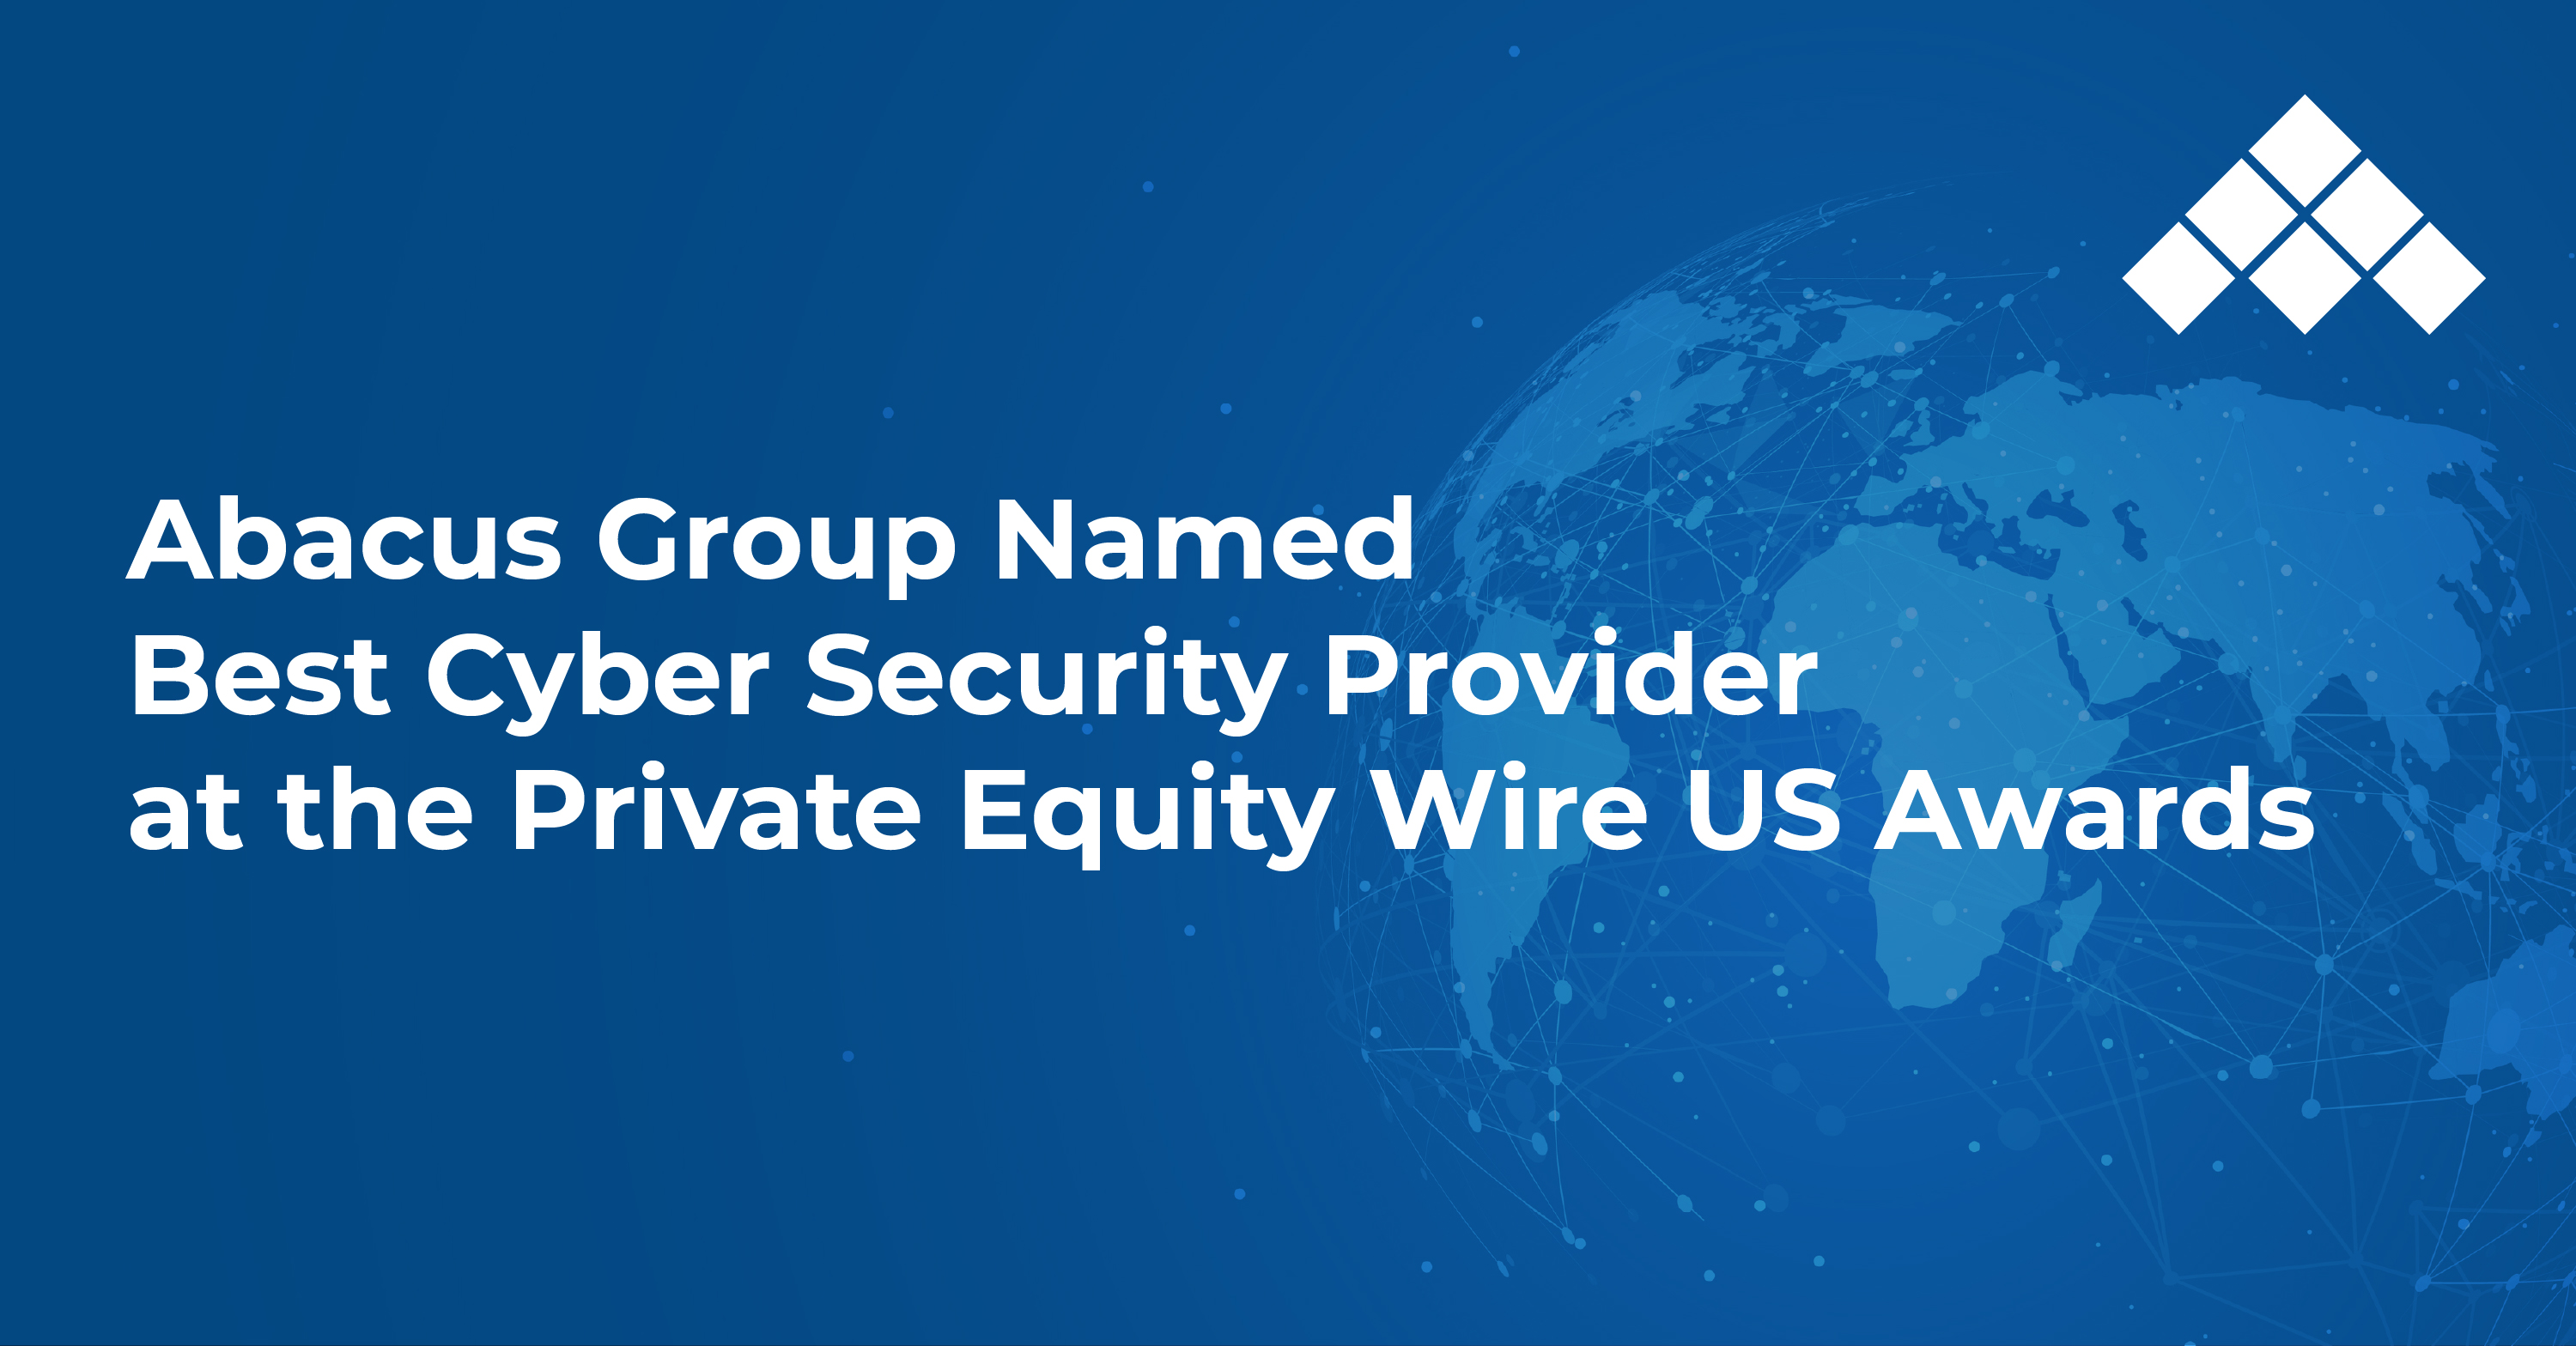 Abacus Group Named Best Cyber Security Provider at Private Equity Wire US Awards